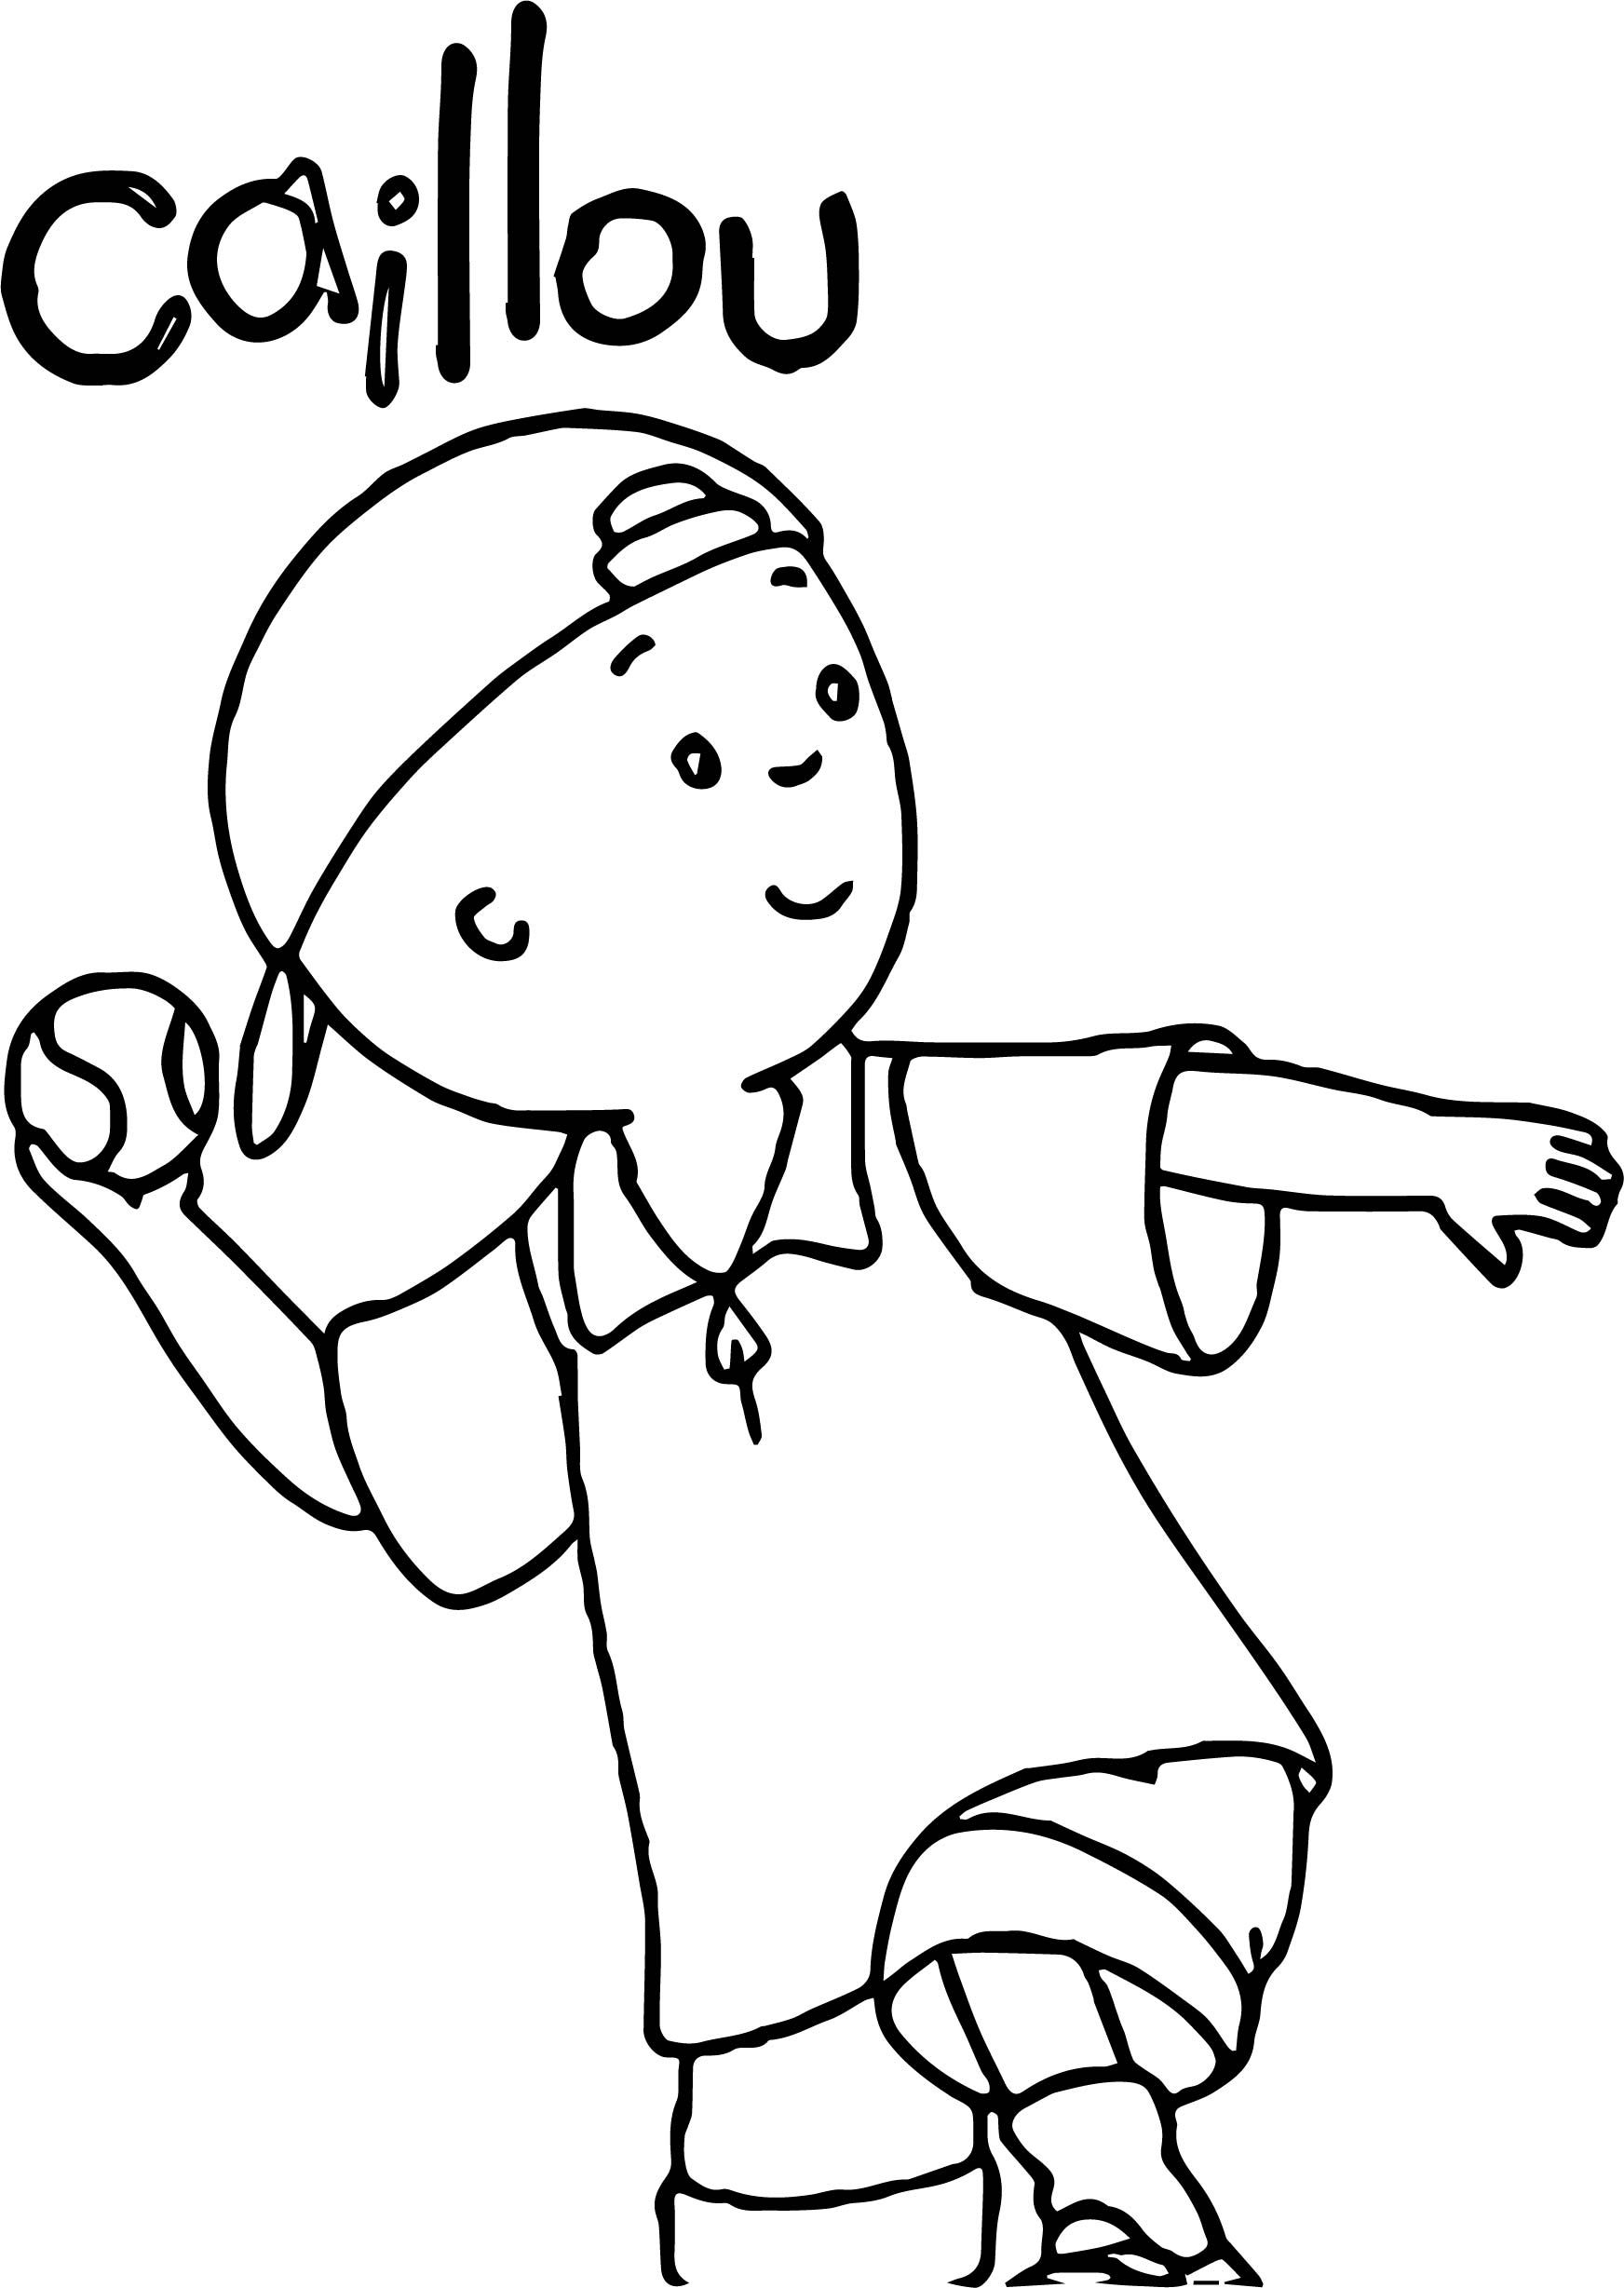 caillou pbs kids coloring pages